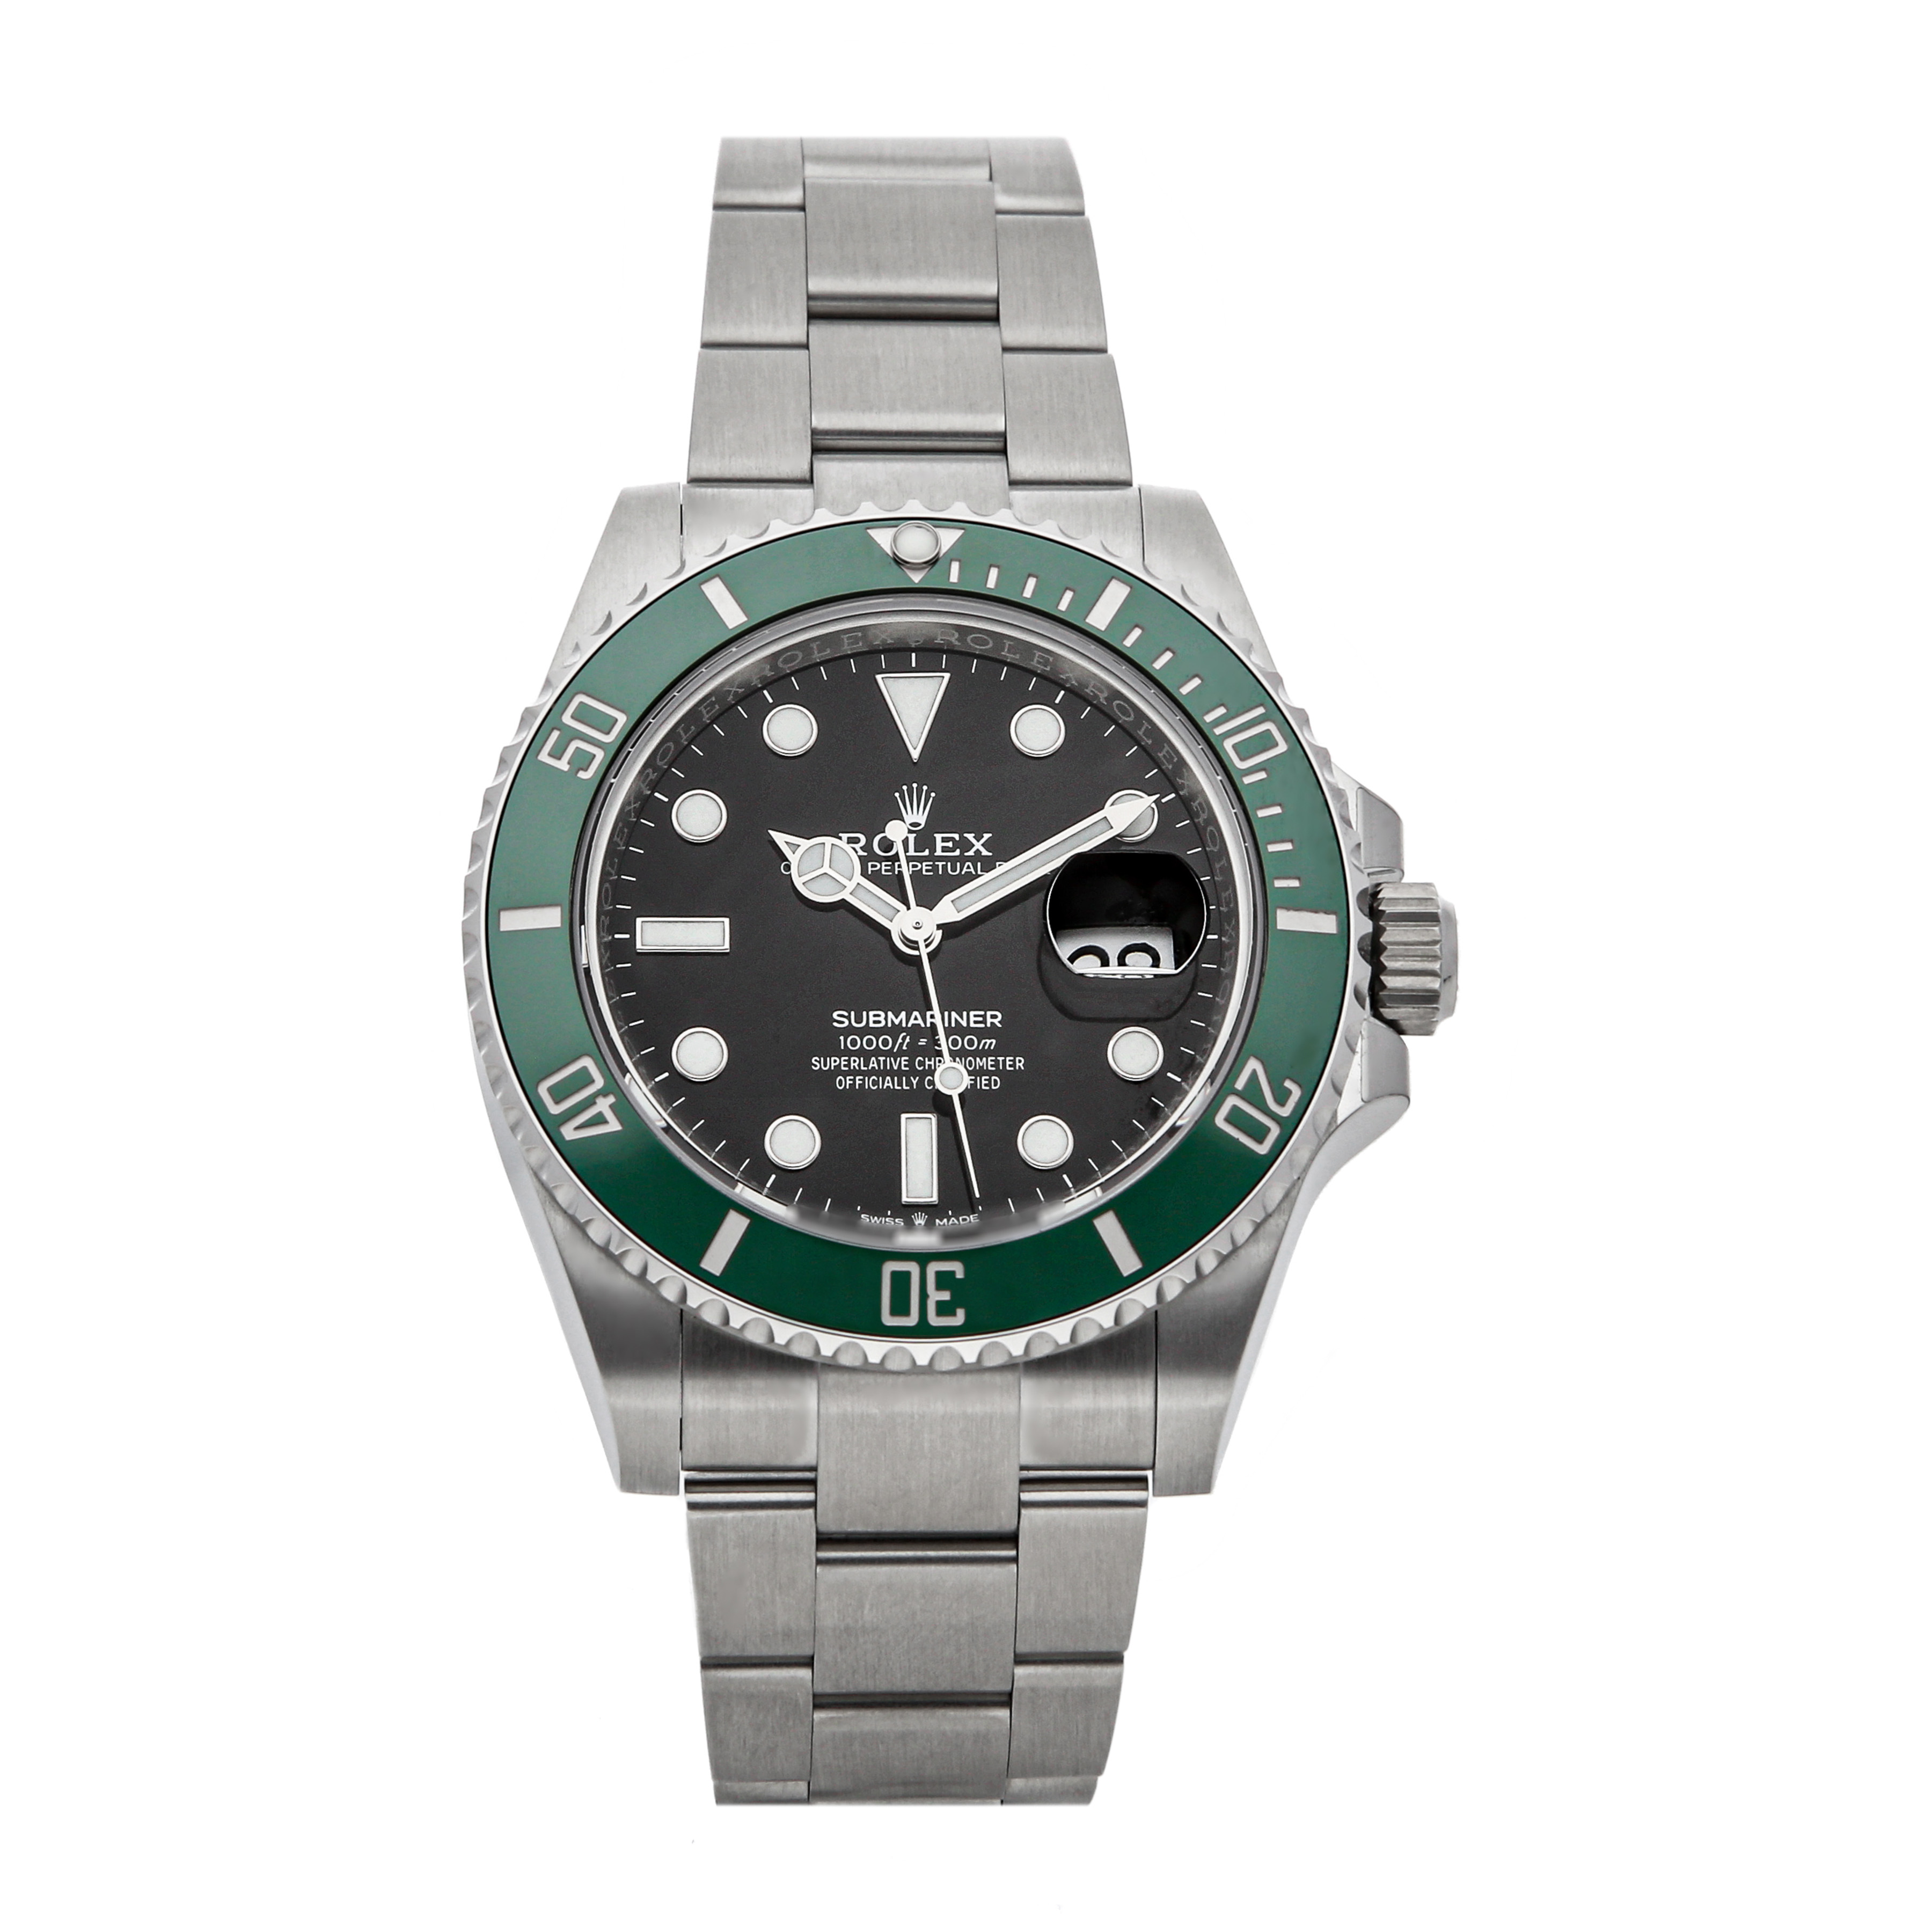 where can i buy a rolex submariner